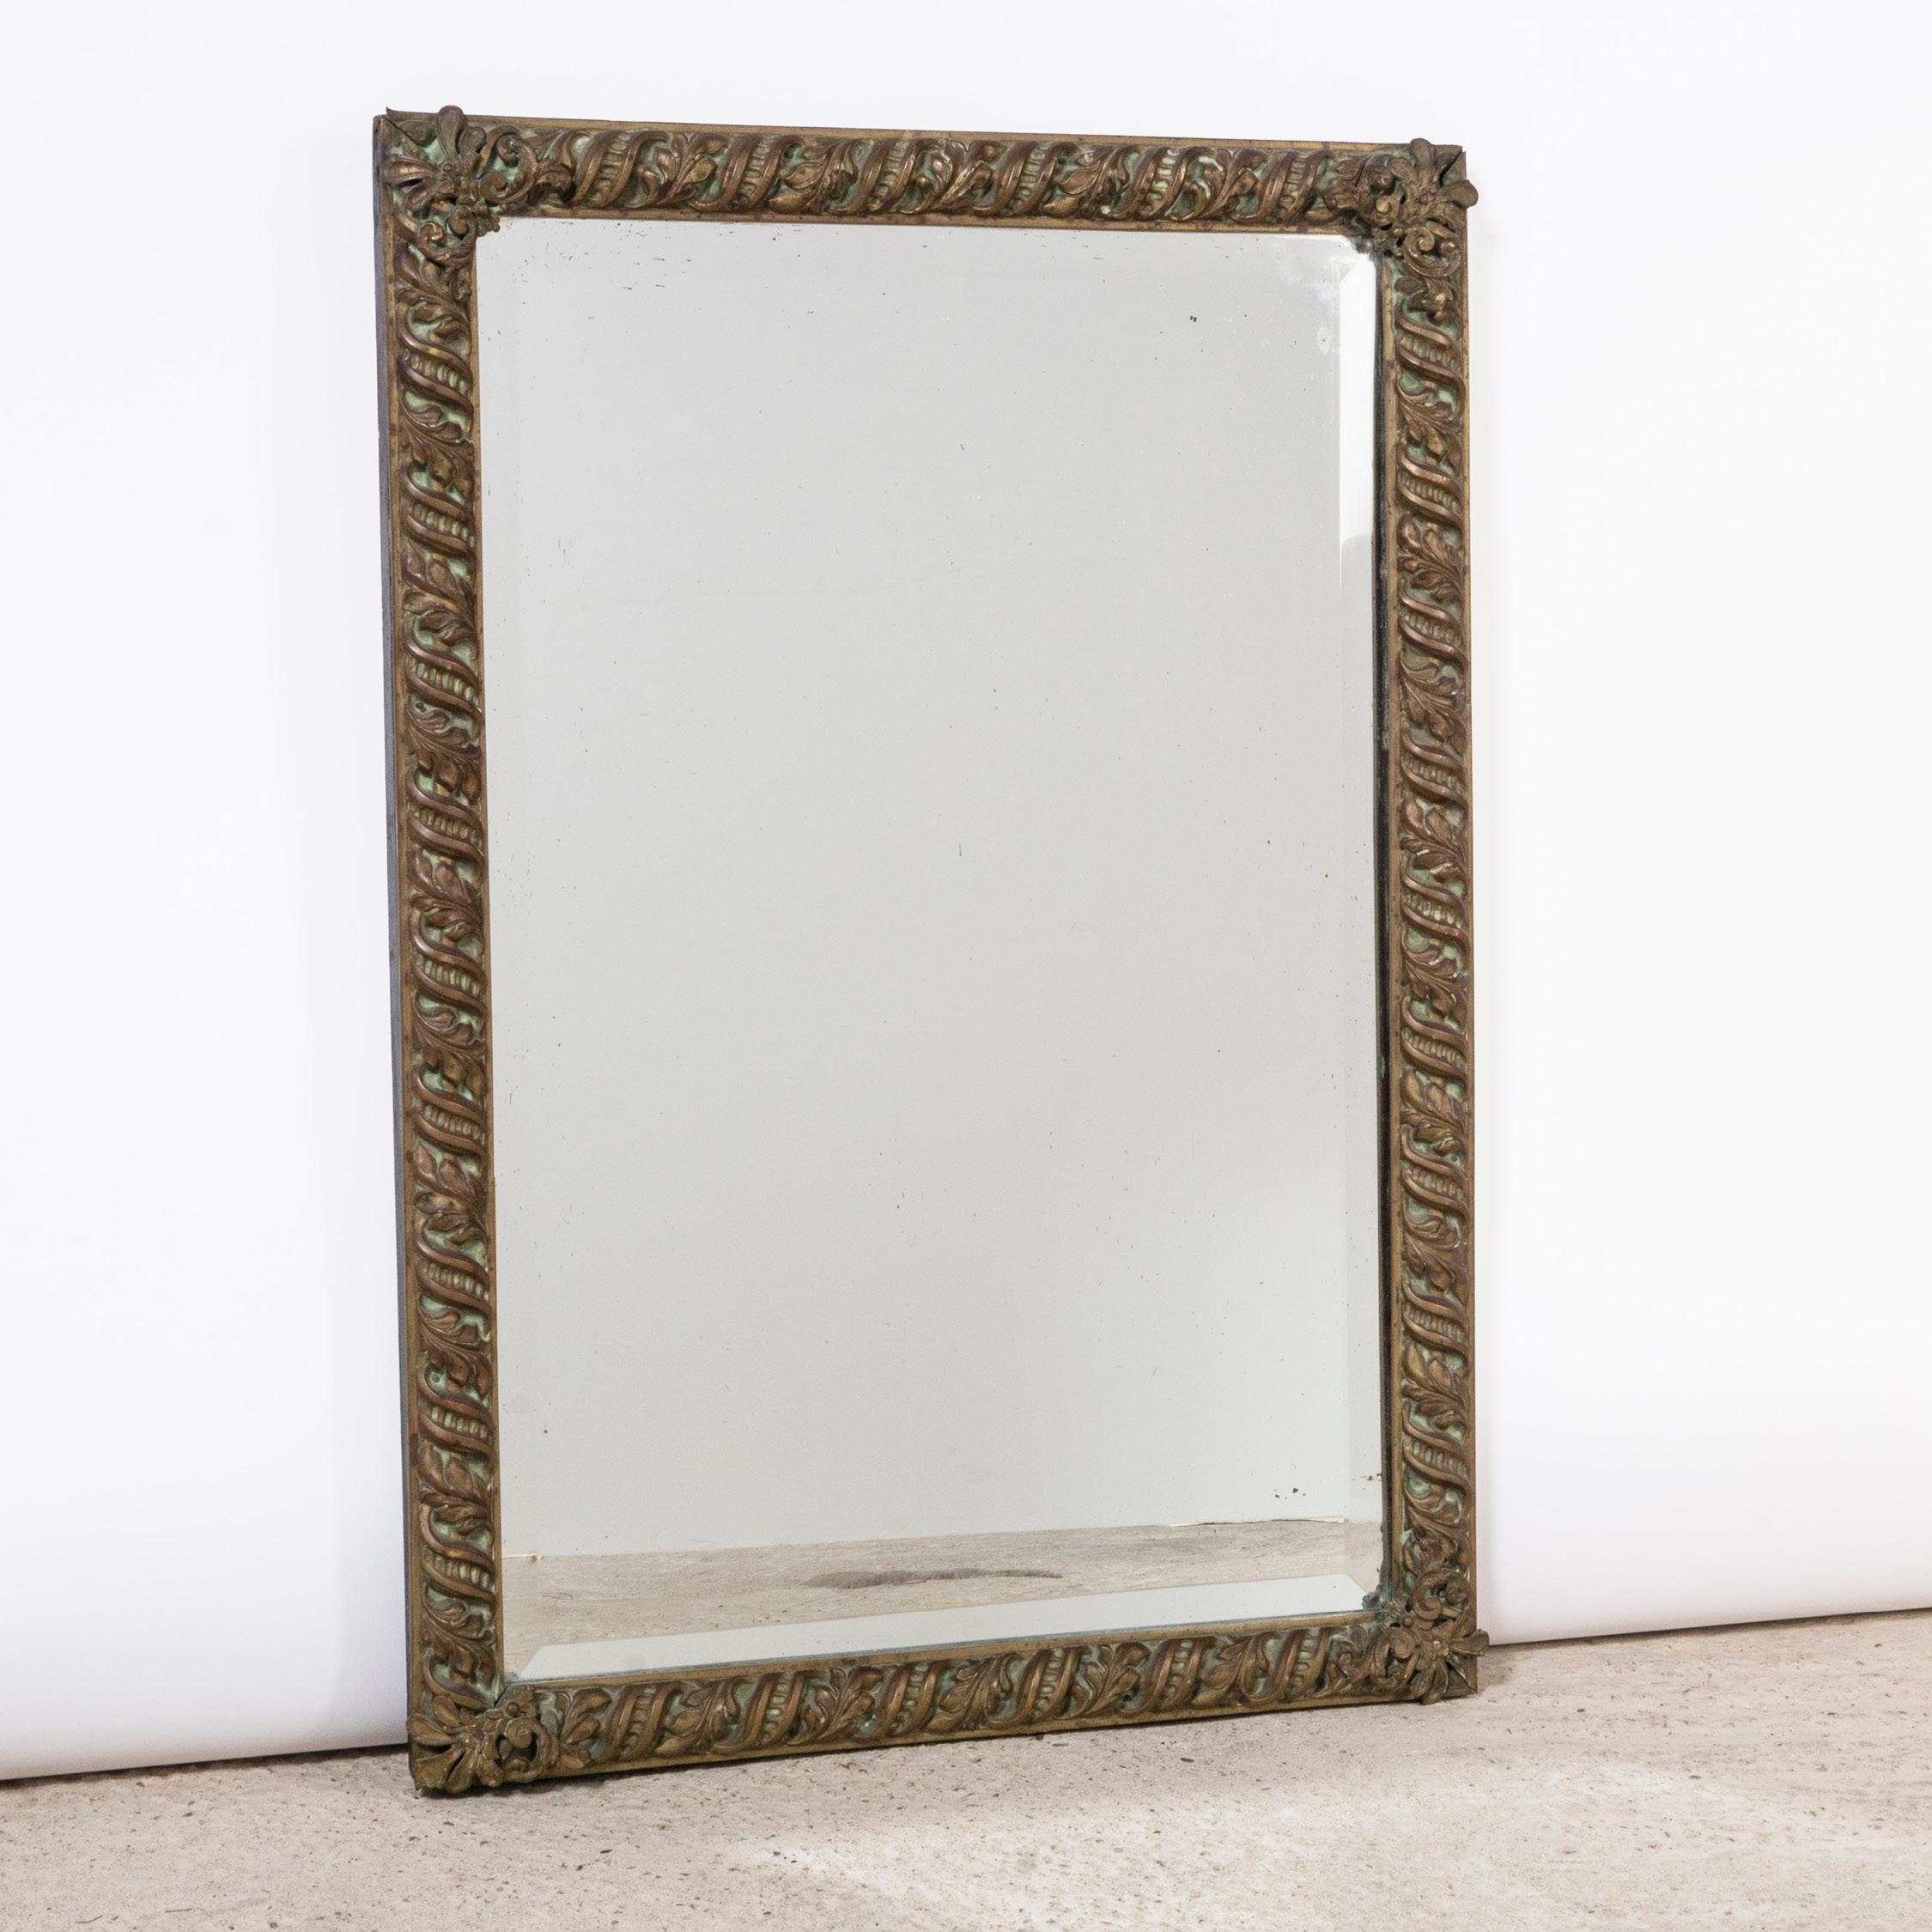 Unique Arts & Crafts style rectangular mirror featuring a decorative copper frame adorned with an intricate scrolling leaf design, showcasing a delightful patina.

Mounted on wood, the copper frame boasts gracefully scrolling ribbons and leaves,